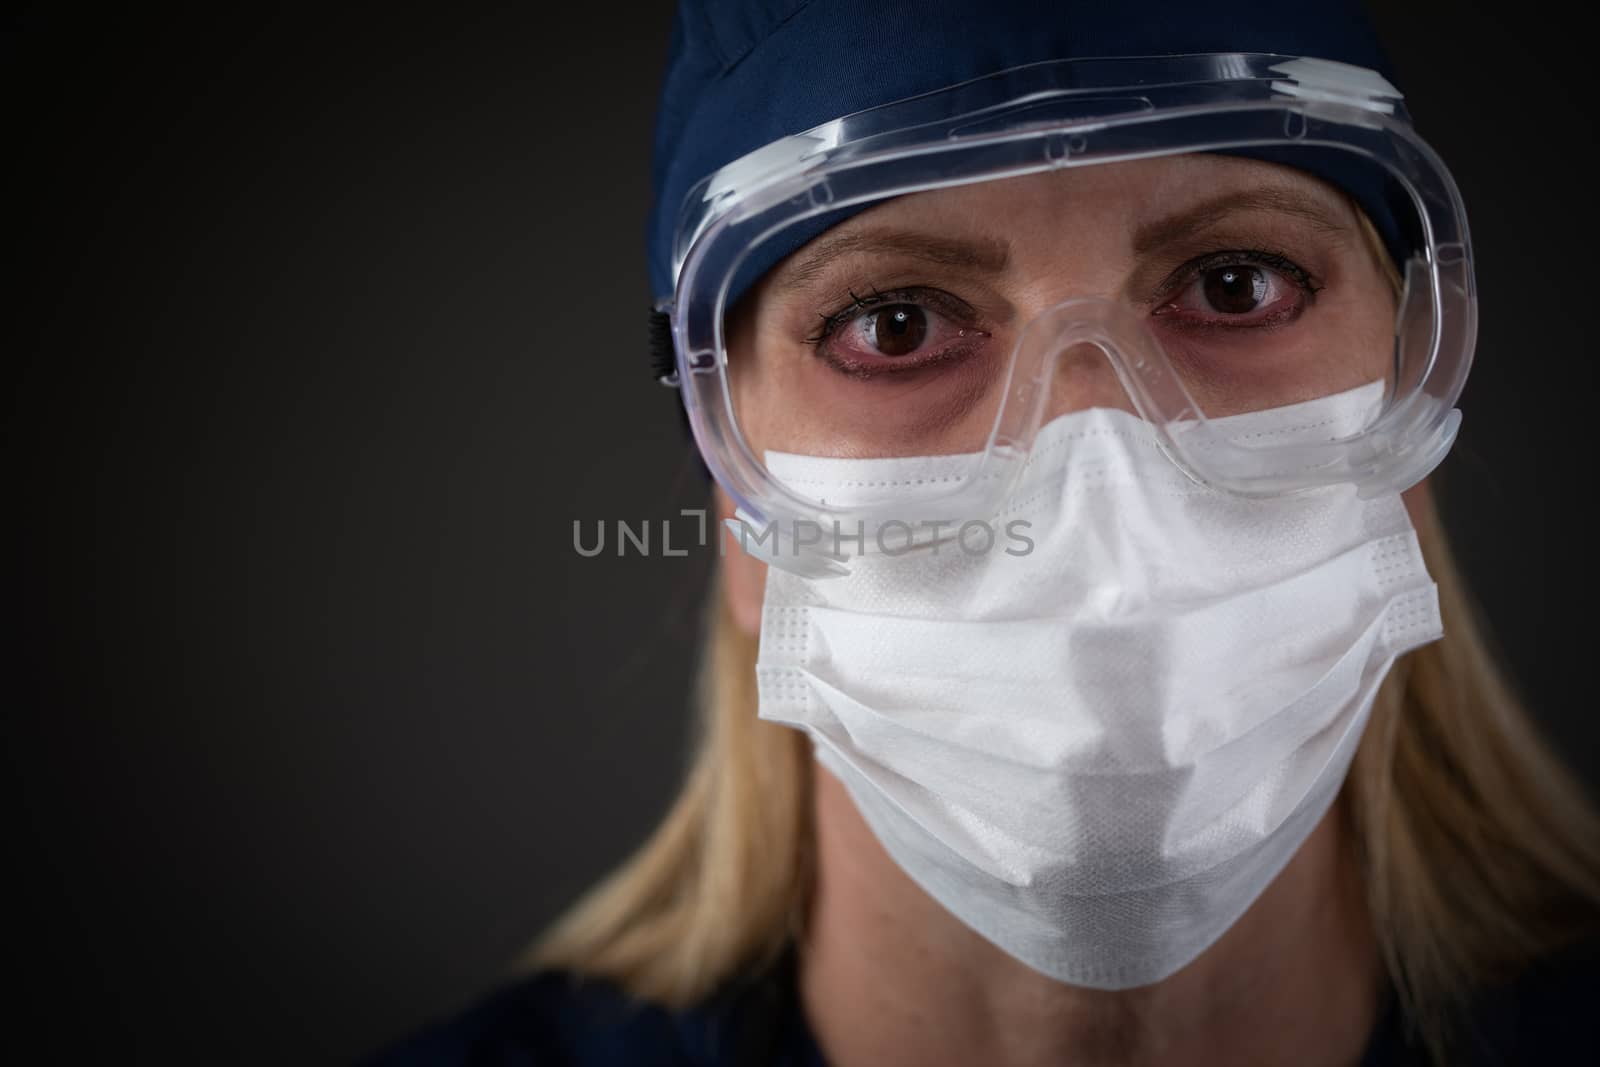 Female Medical Worker Wearing Protective Gear Showing Symptoms of Disease. by Feverpitched